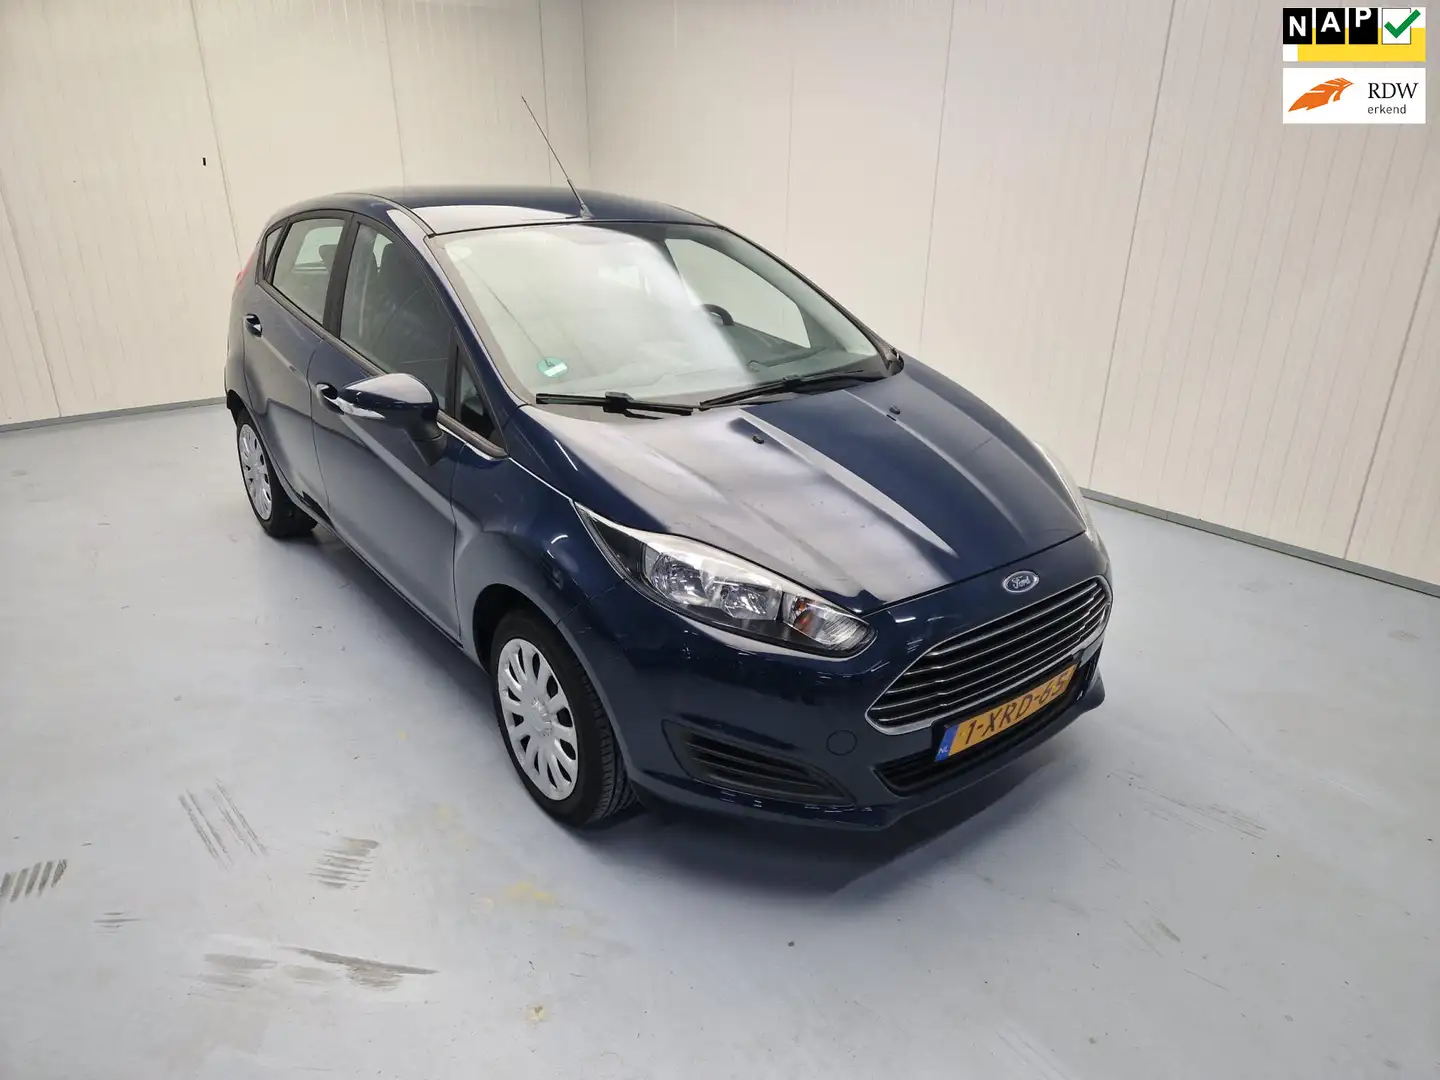 Ford Fiesta 1.0 Style 5 Drs Navigatie Airco Blauw - 1